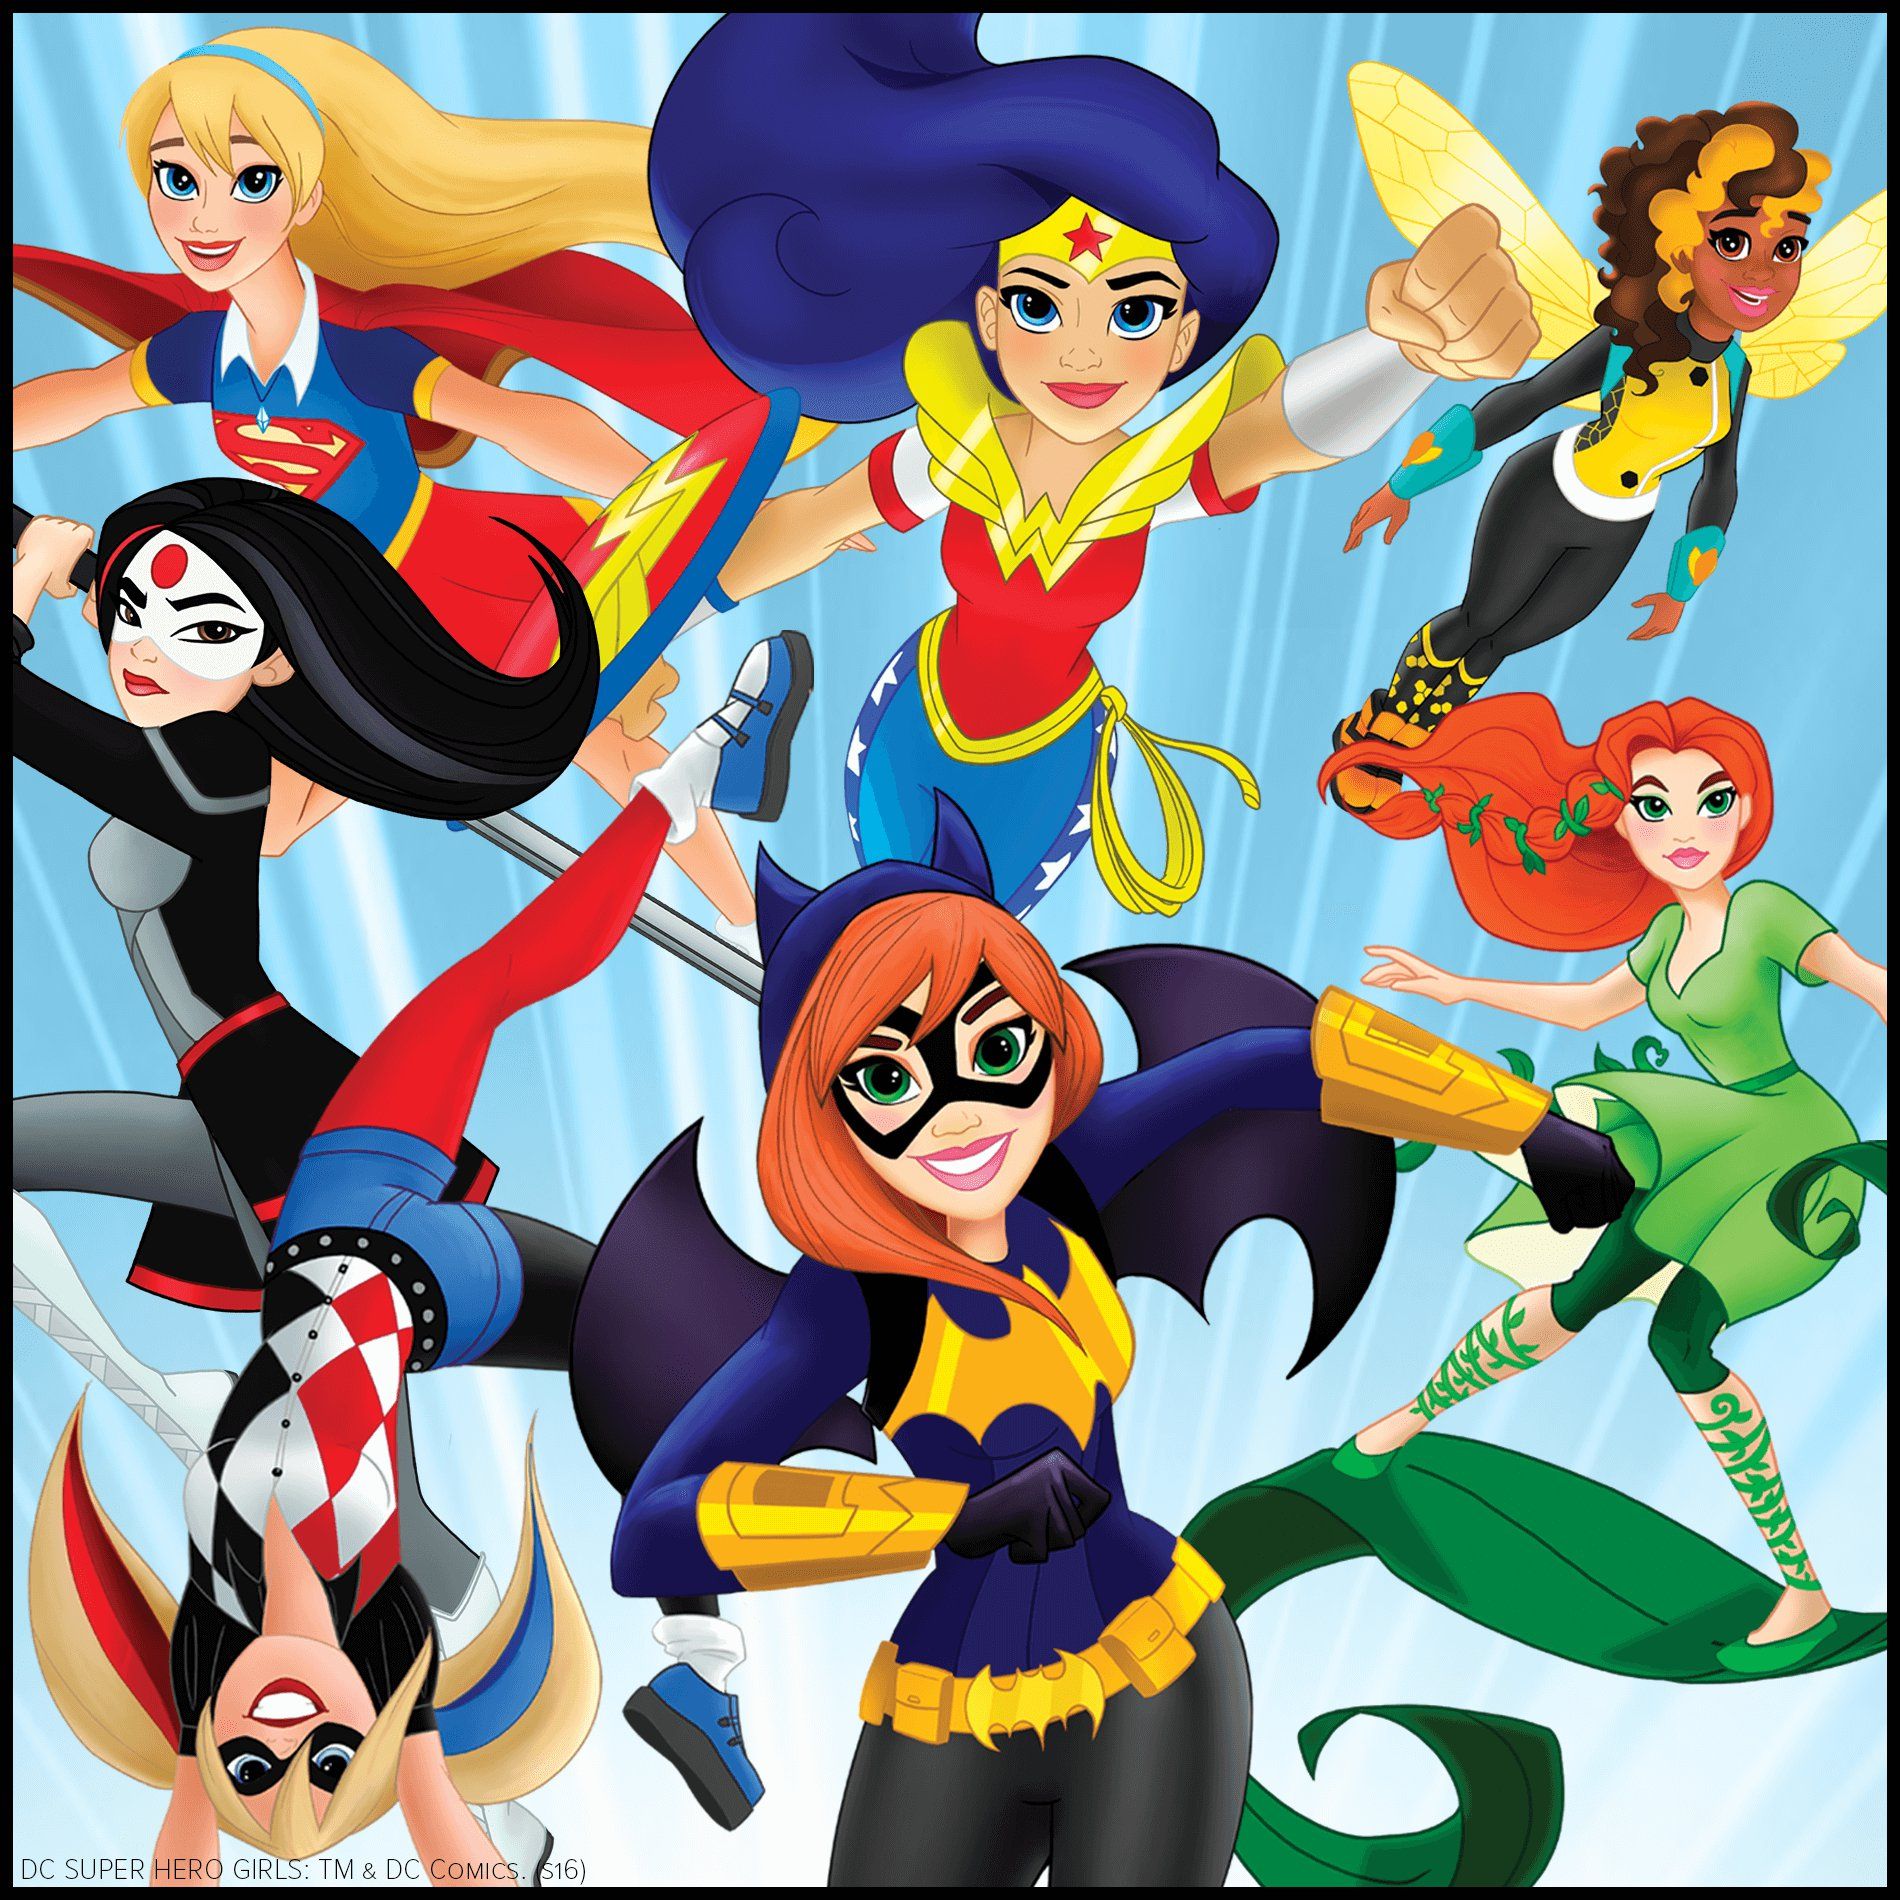 DC Super Hero Girls' Launches, a Site Geared Towards Younger